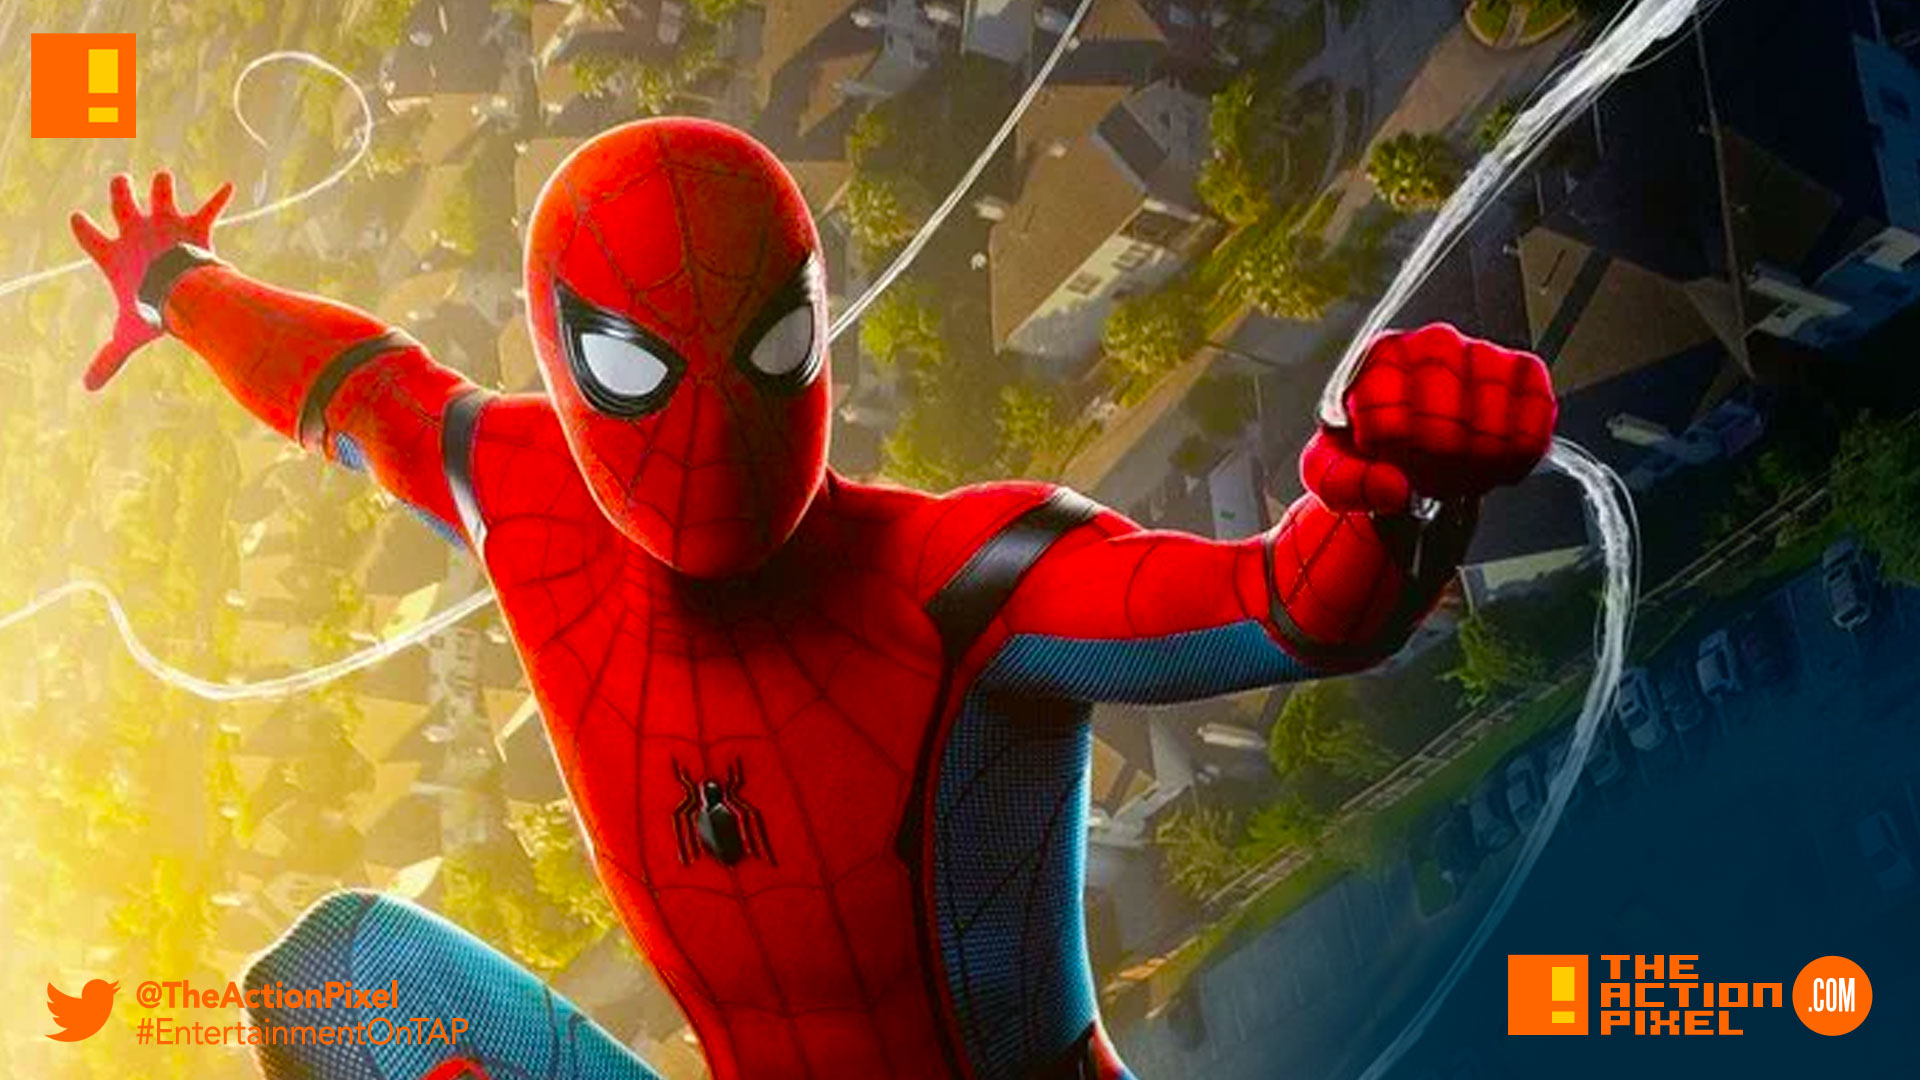 spider-man, spider-man homecoming, the action pixel, marvel,sony, sony pictures, tom holland, iron man, peter parker, vulture, tony stark, entertainment on tap, poster, iron man, imax, spiderman,poster,final